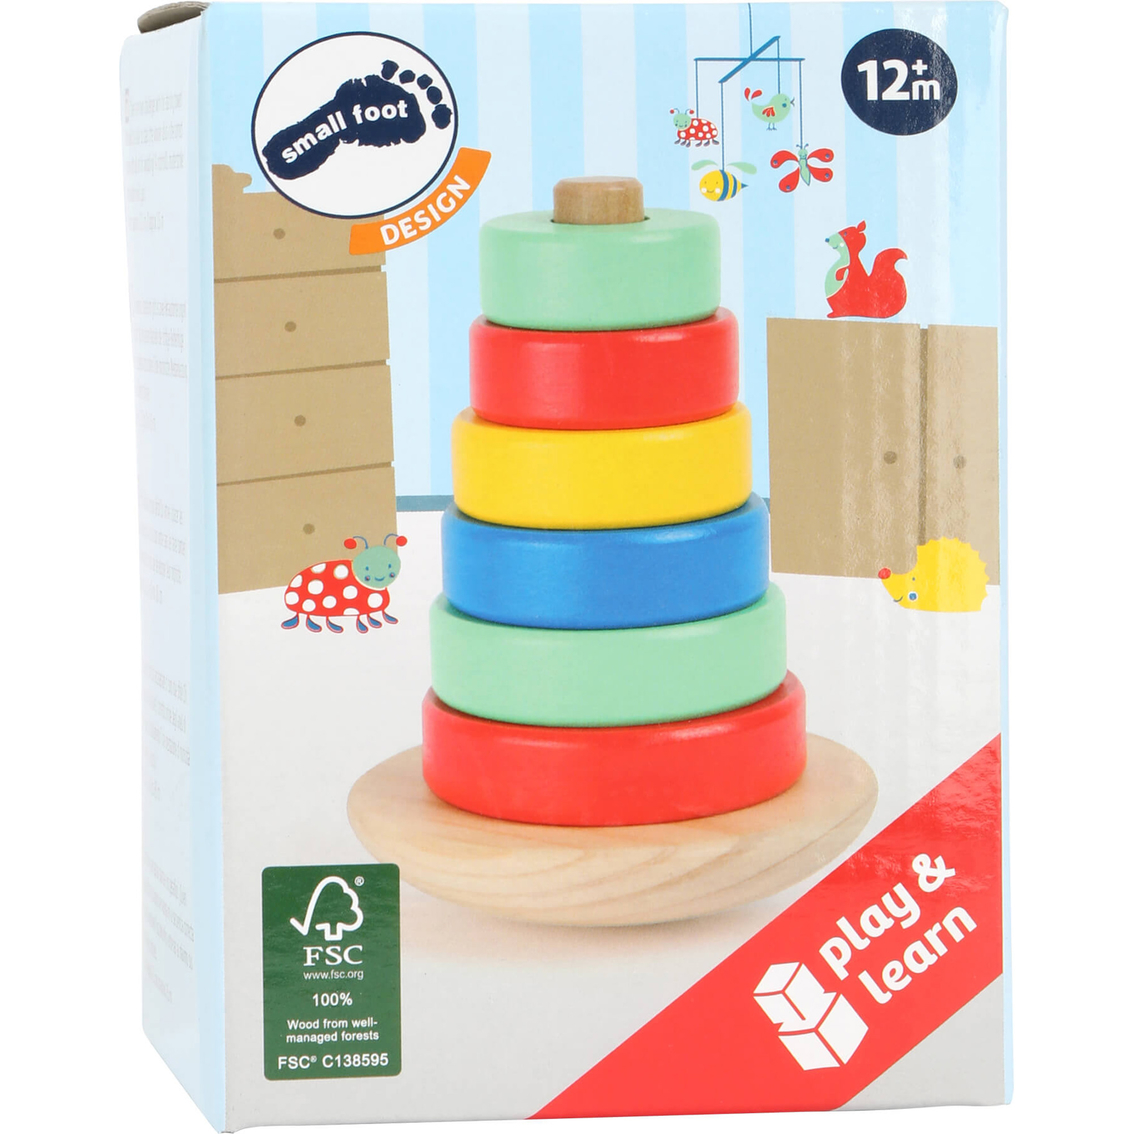 Small Foot Wooden Toys Game Of Skill Stacking Tower Move It! Playset - Image 3 of 3